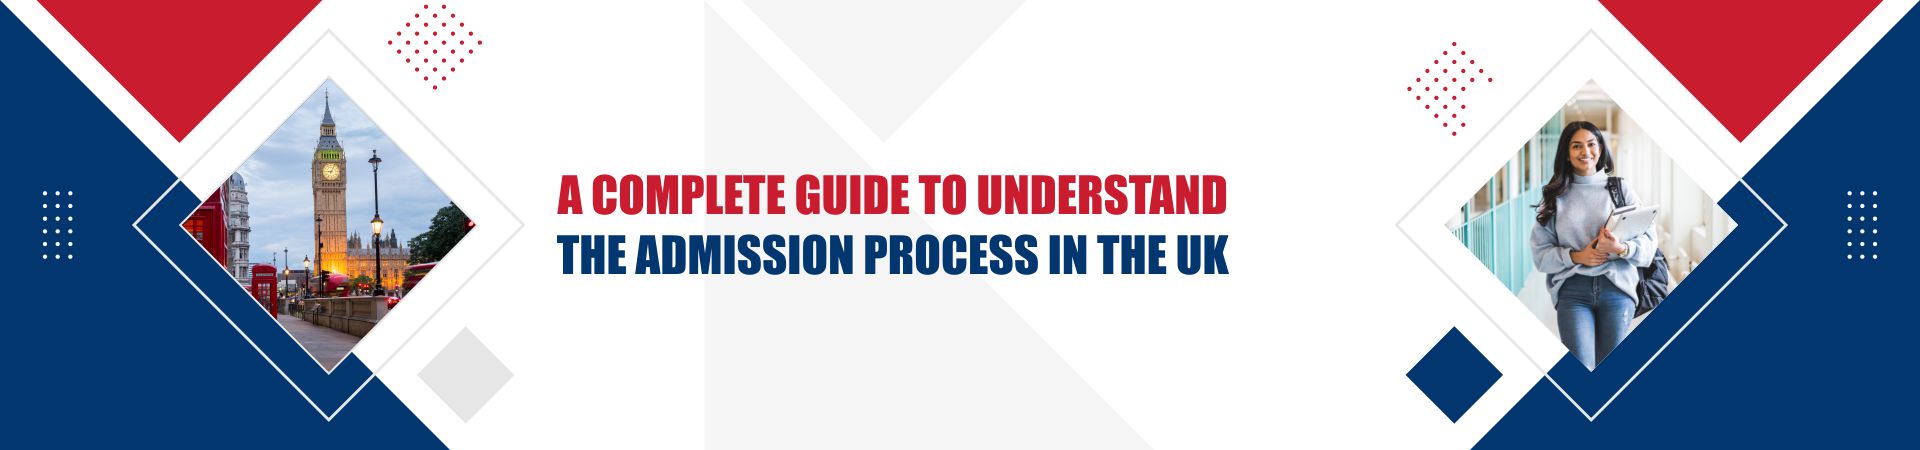 A Complete Guide to Understand the Admission Process in the UK